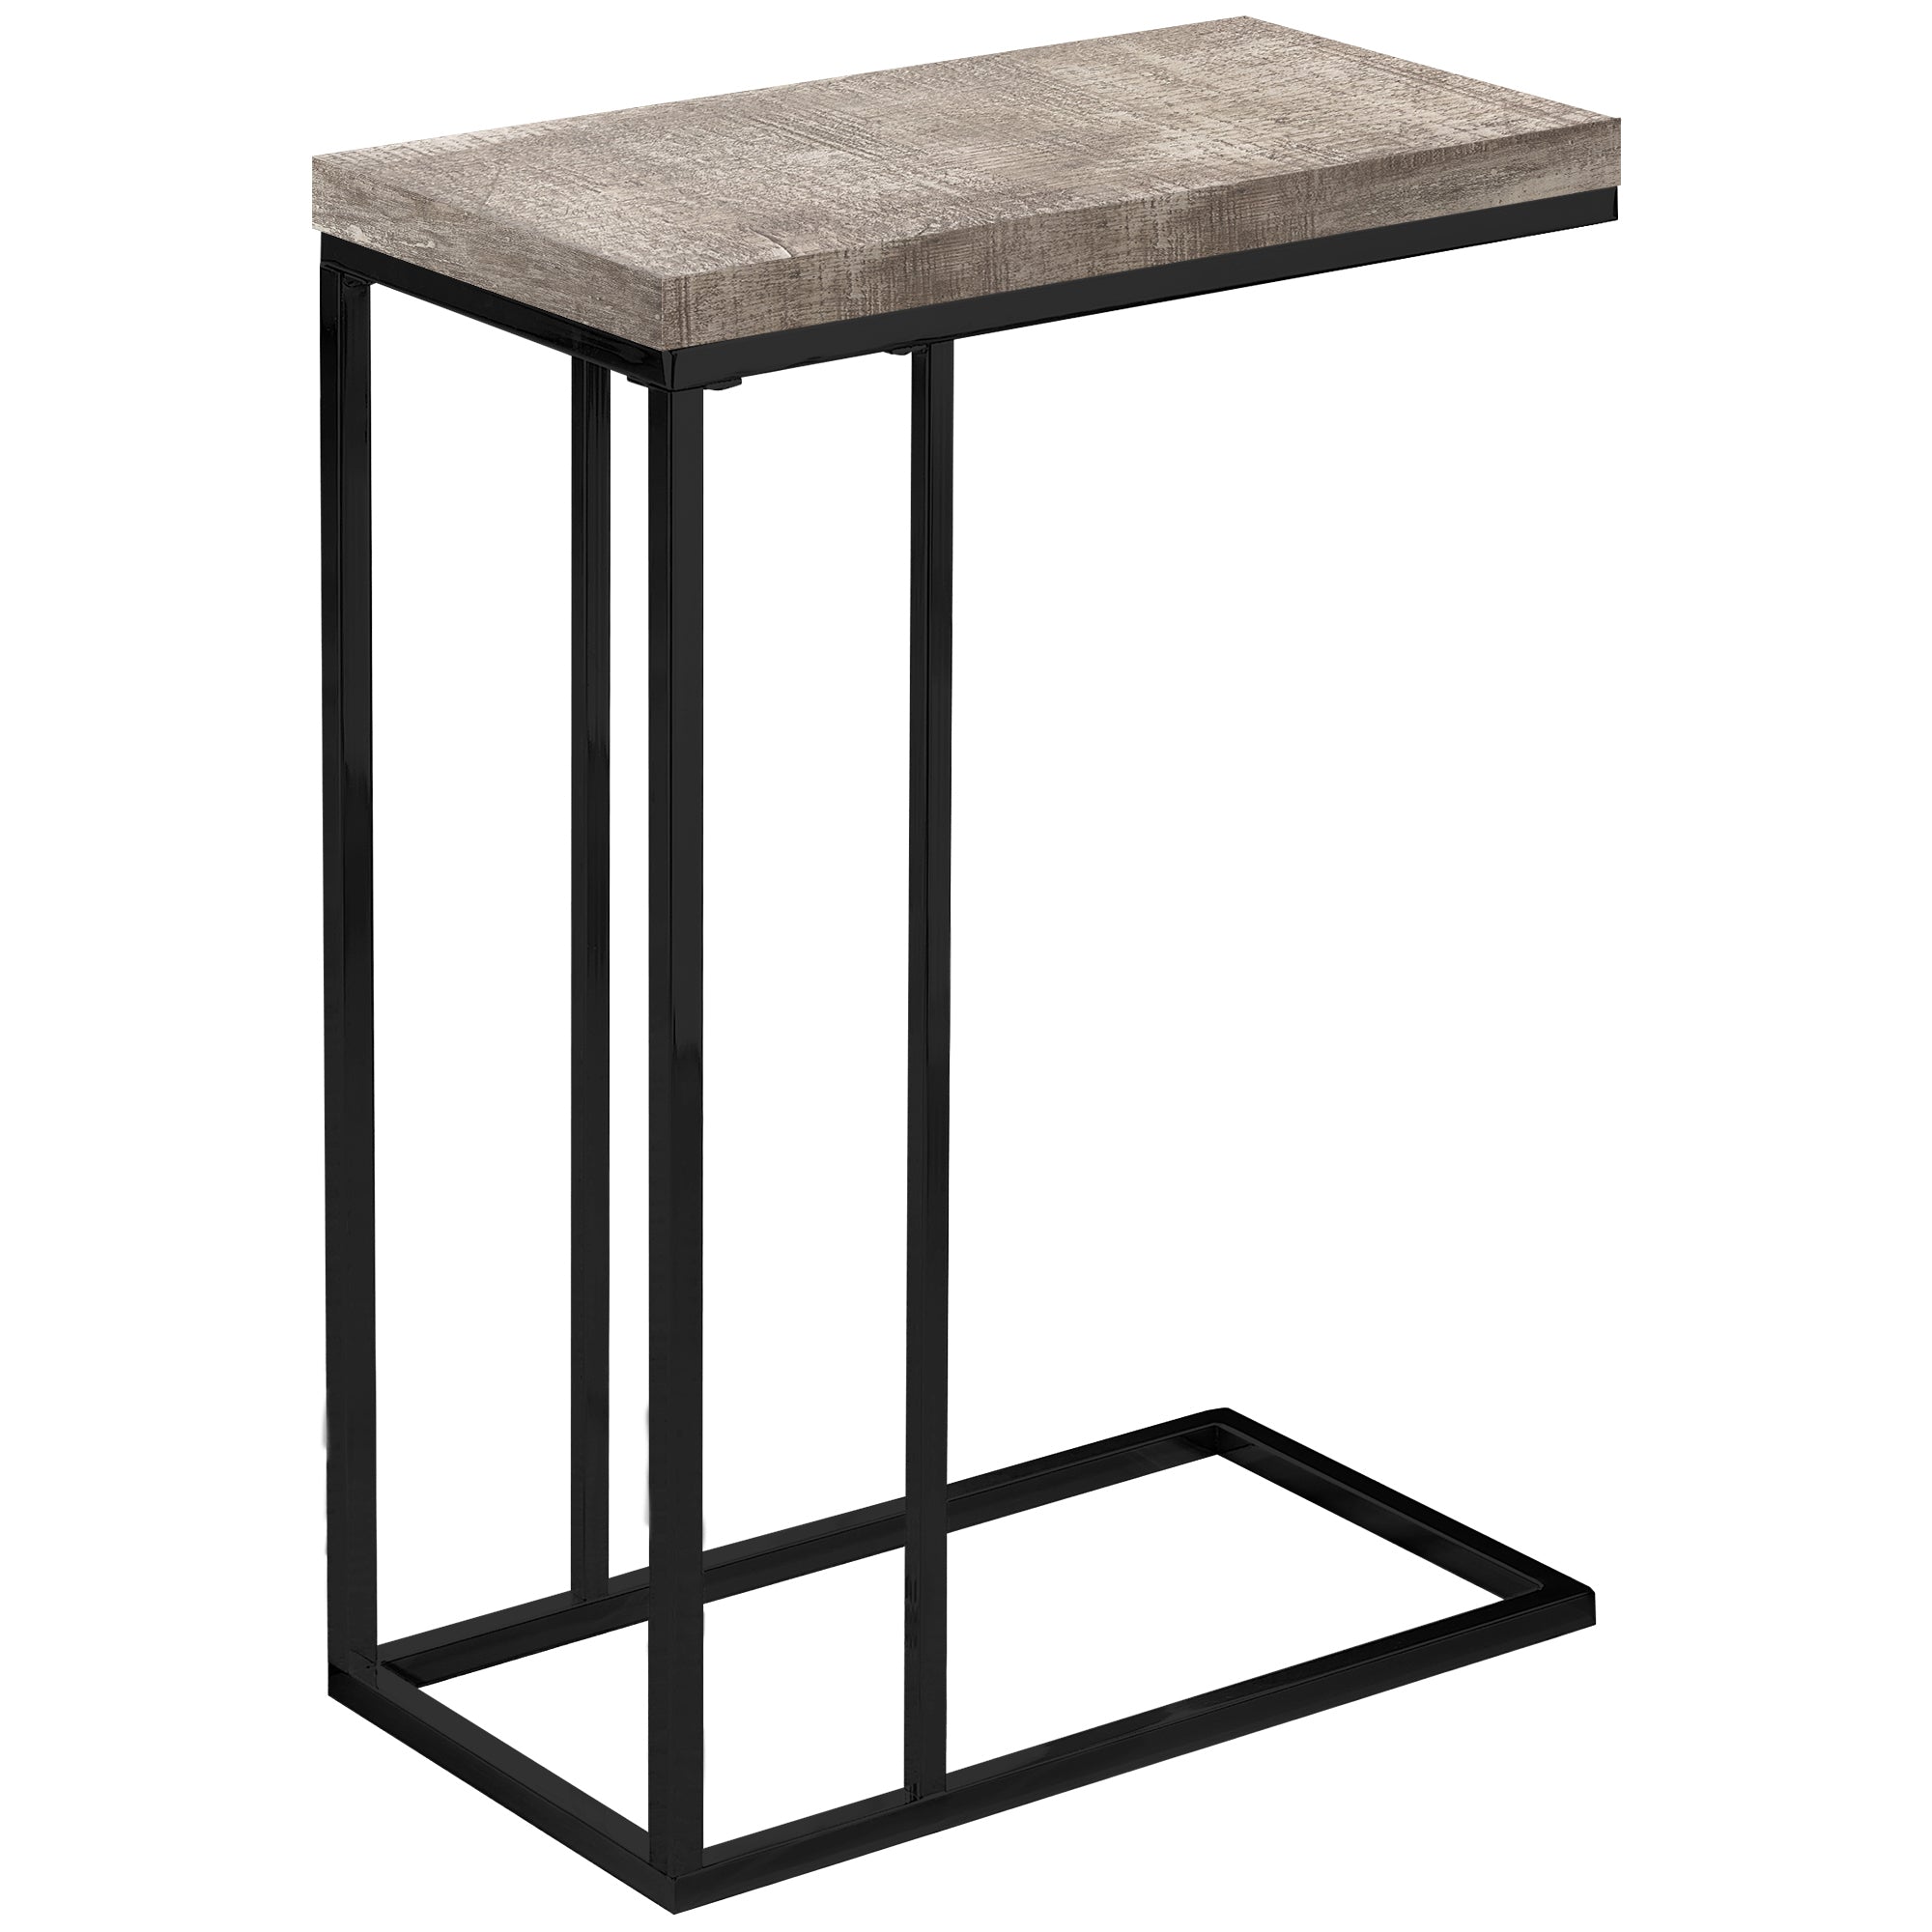 Accent Table - Taupe Reclaimed Wood-Look / Black Metal